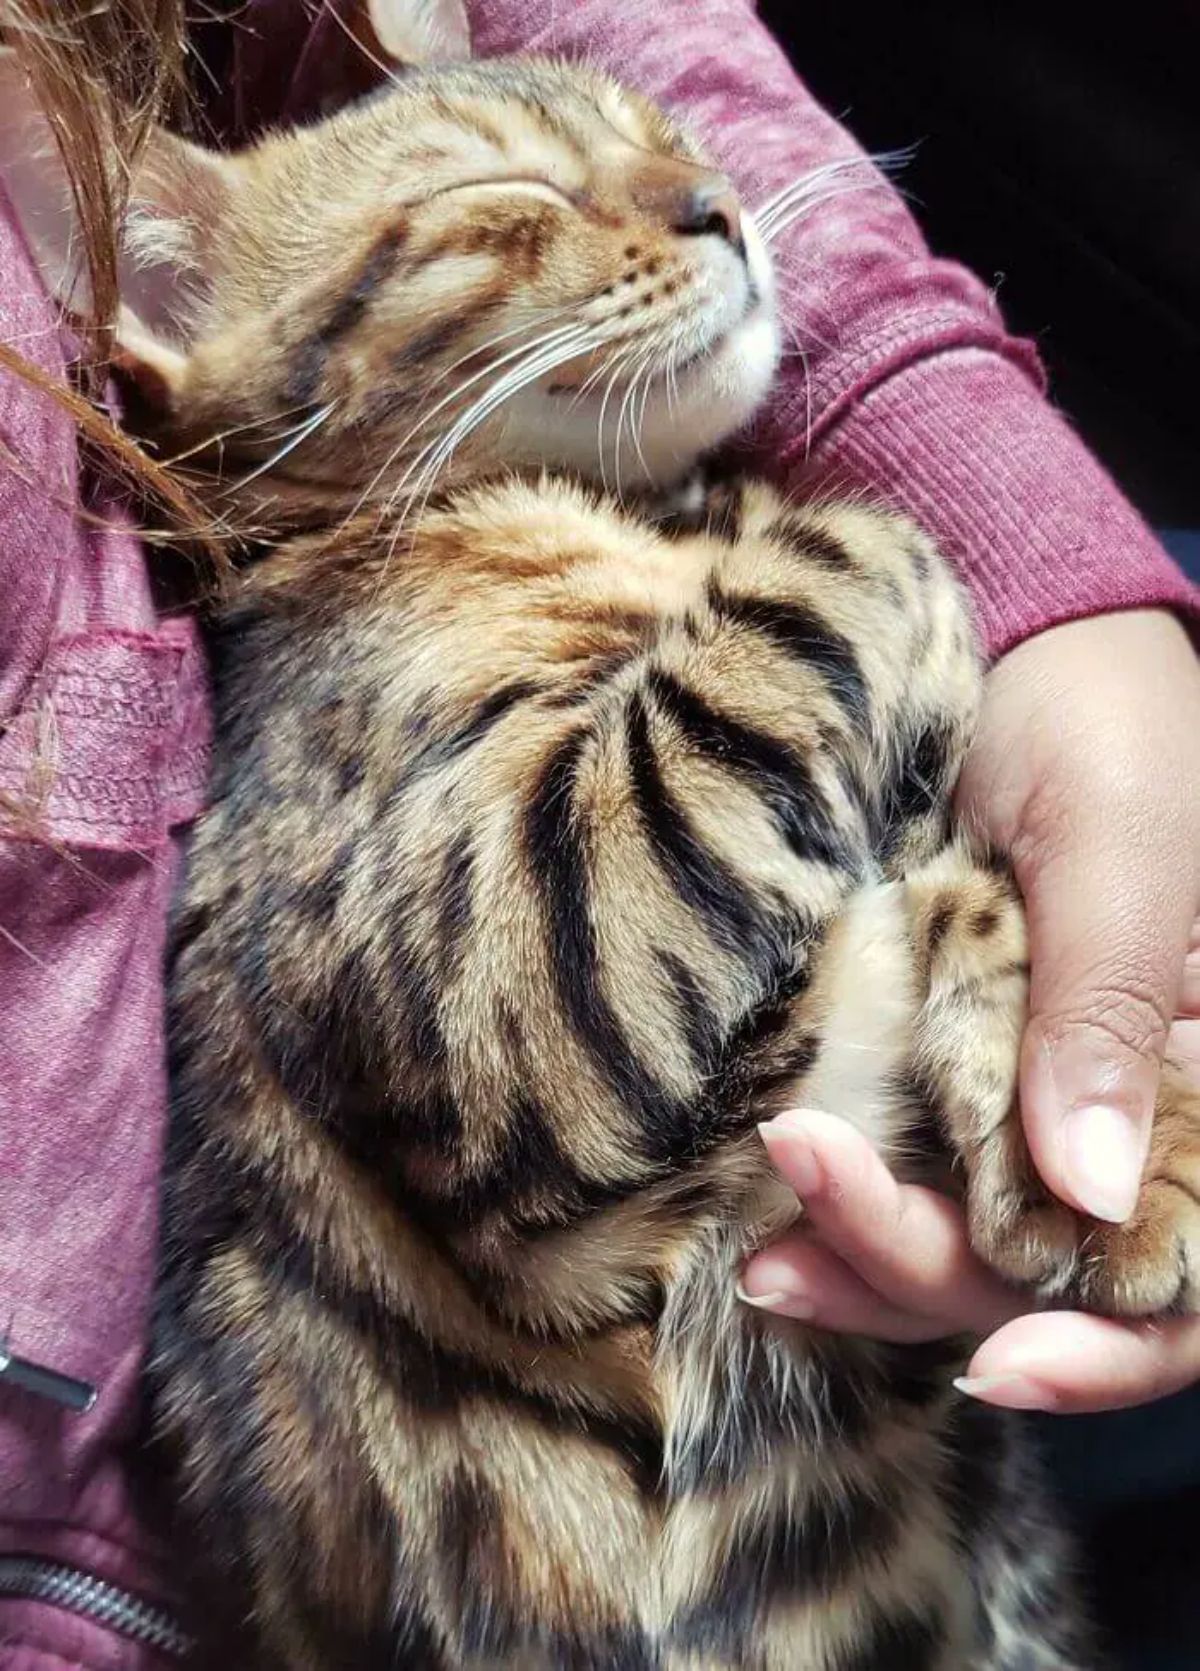 brown tabby cat cuddling and sleeping in someone's arms